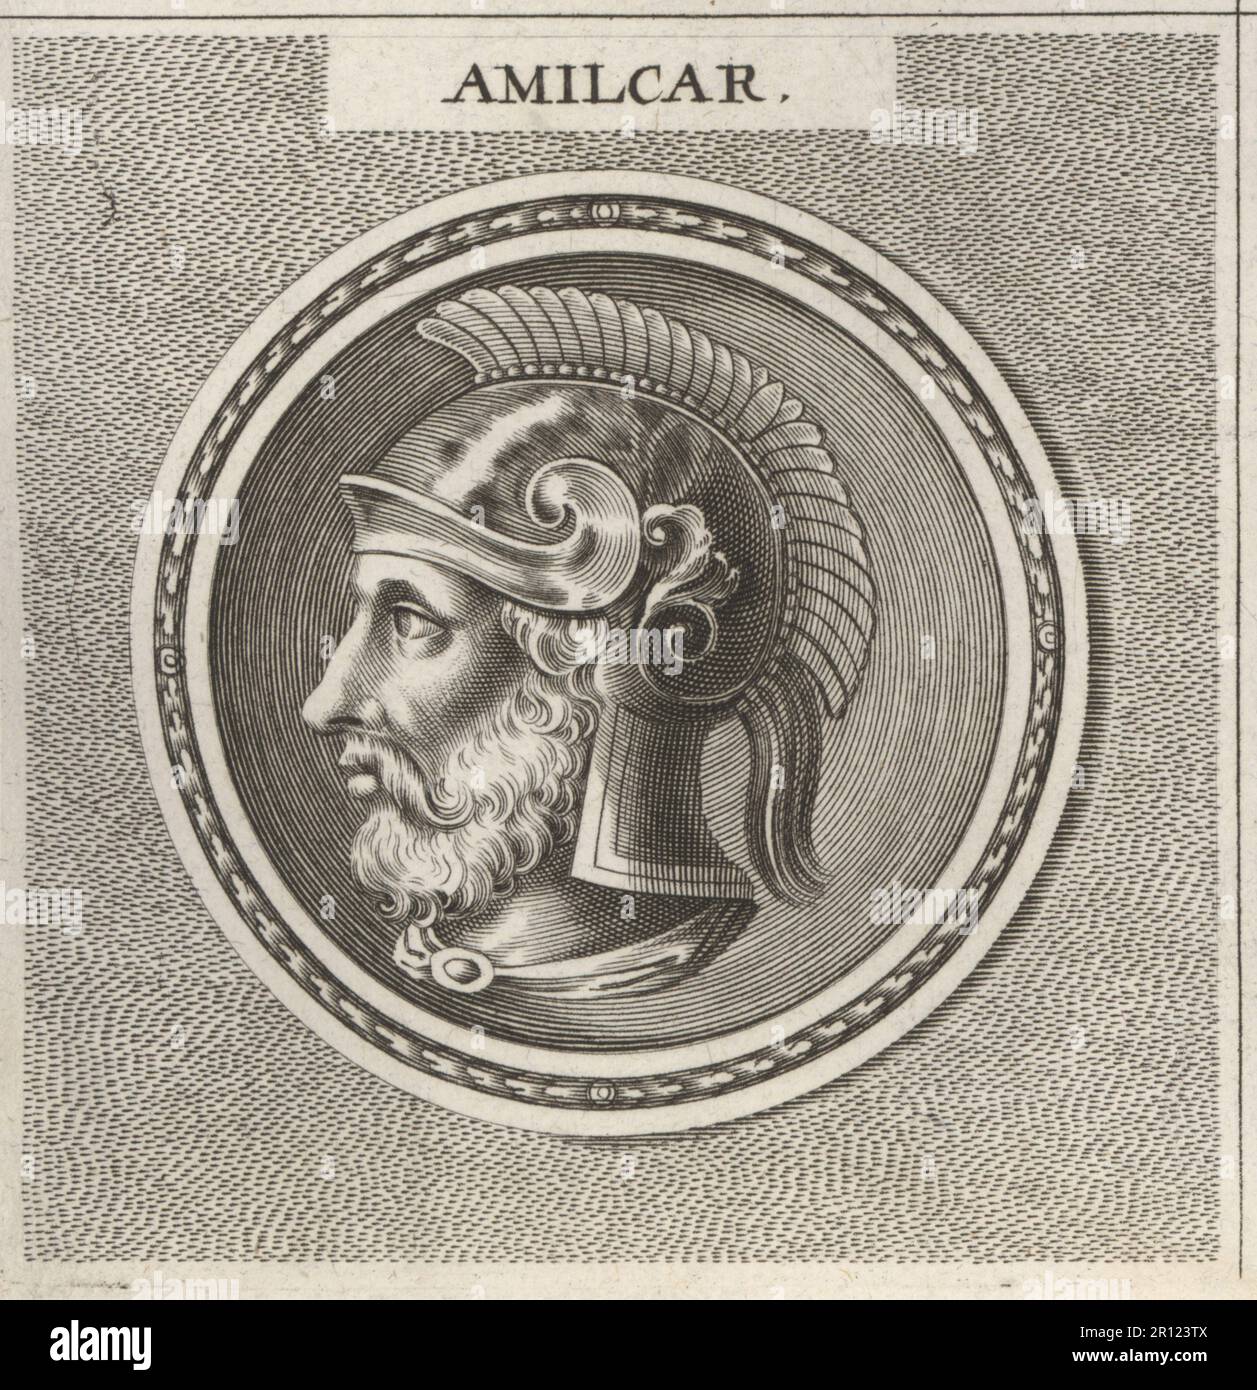 Hamilcar I of Carthage, Magonid general and king, c.510-480 BC. Son of Hanno, father of Gisco, killed at the Battle of Himera, Sicily. Head of bearded man in crested helmet. Amilcar. Copperplate engraving after an illustration by Joachim von Sandrart from his L’Academia Todesca, della Architectura, Scultura & Pittura, oder Teutsche Academie, der Edlen Bau- Bild- und Mahlerey-Kunste, German Academy of Architecture, Sculpture and Painting, Jacob von Sandrart, Nuremberg, 1675. Stock Photo